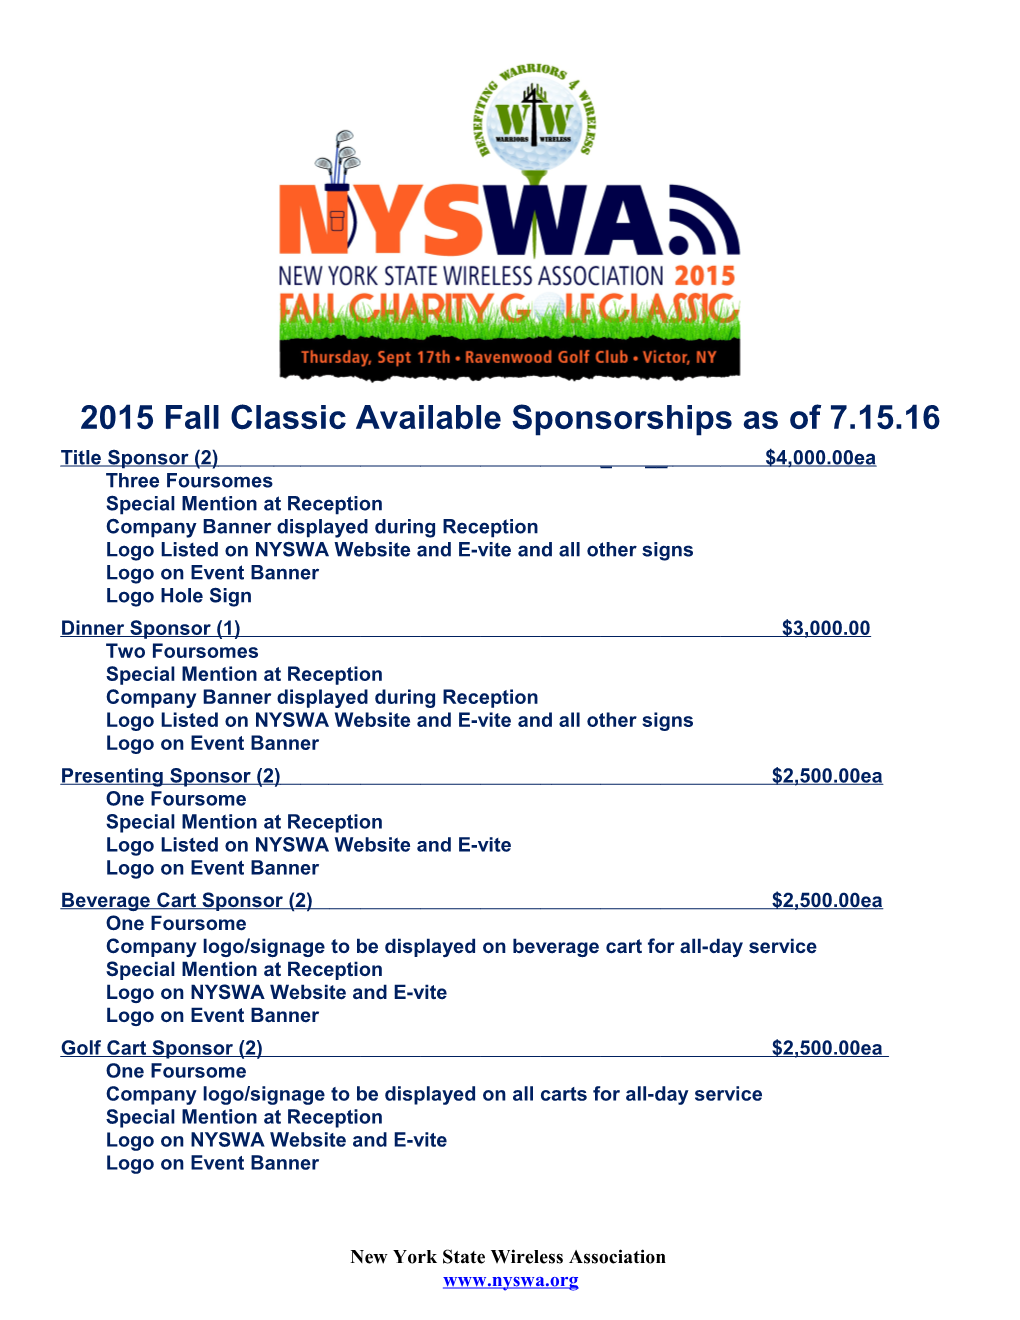 Proposed Sponsorship Levels for NYSWA Golf Outing on September 17, 2007